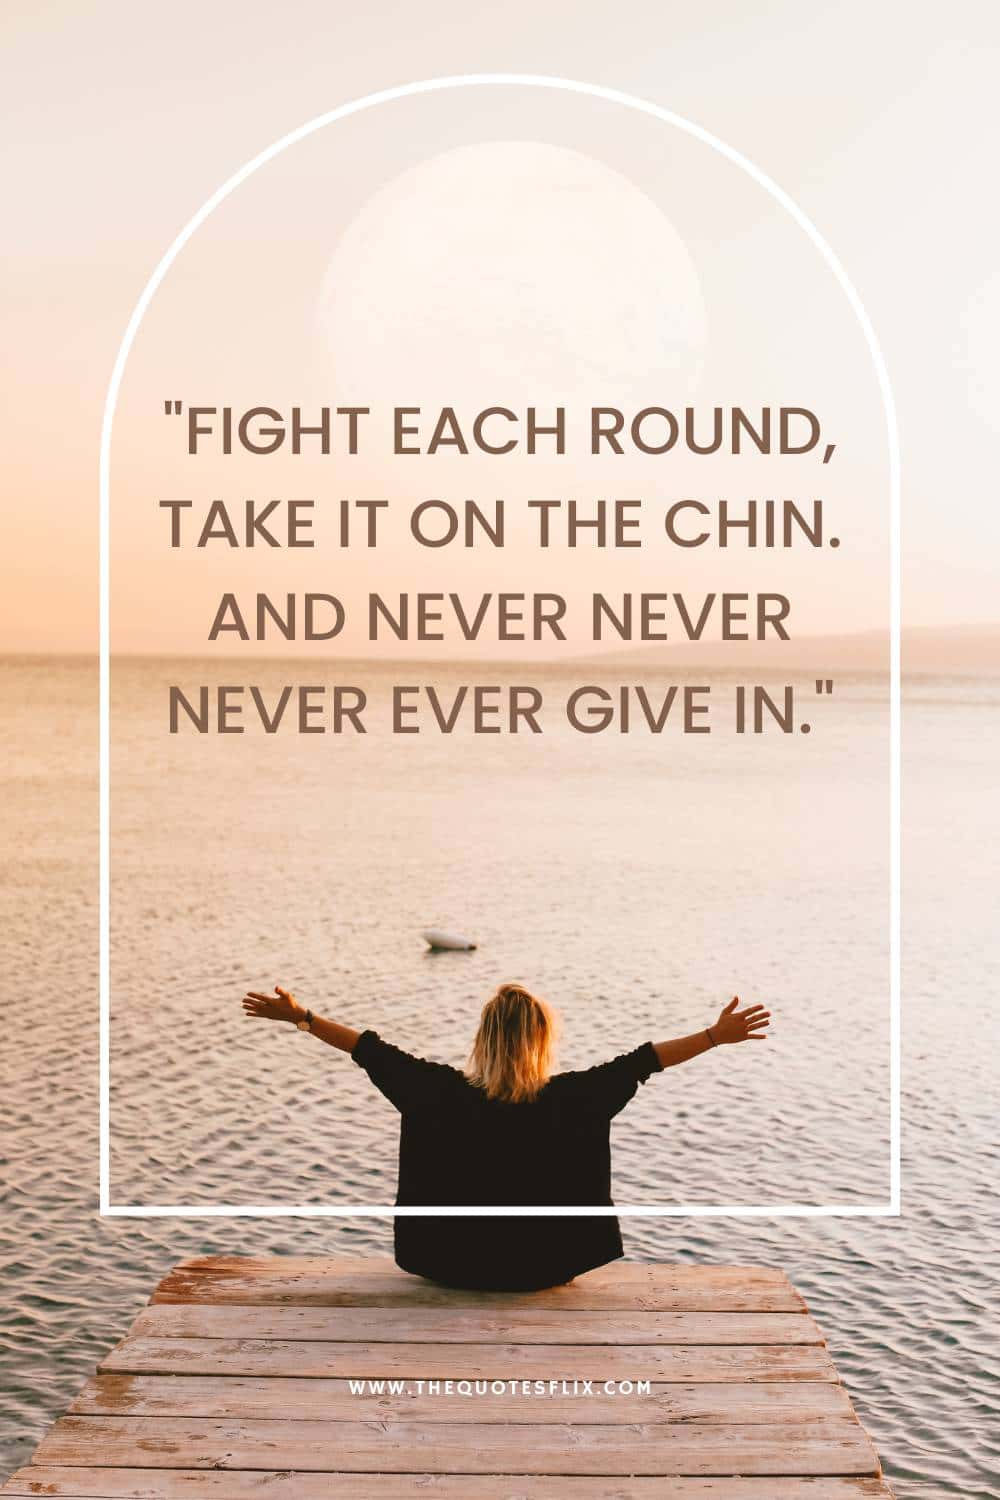 short cancer quotes - fight each round take it on chin